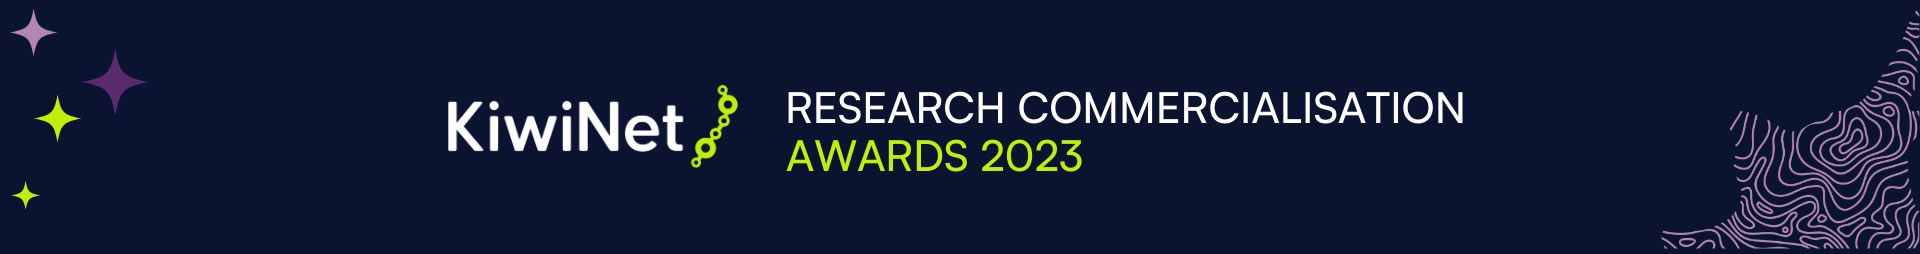 2023 KiwiNet Research Commercialisation Awards